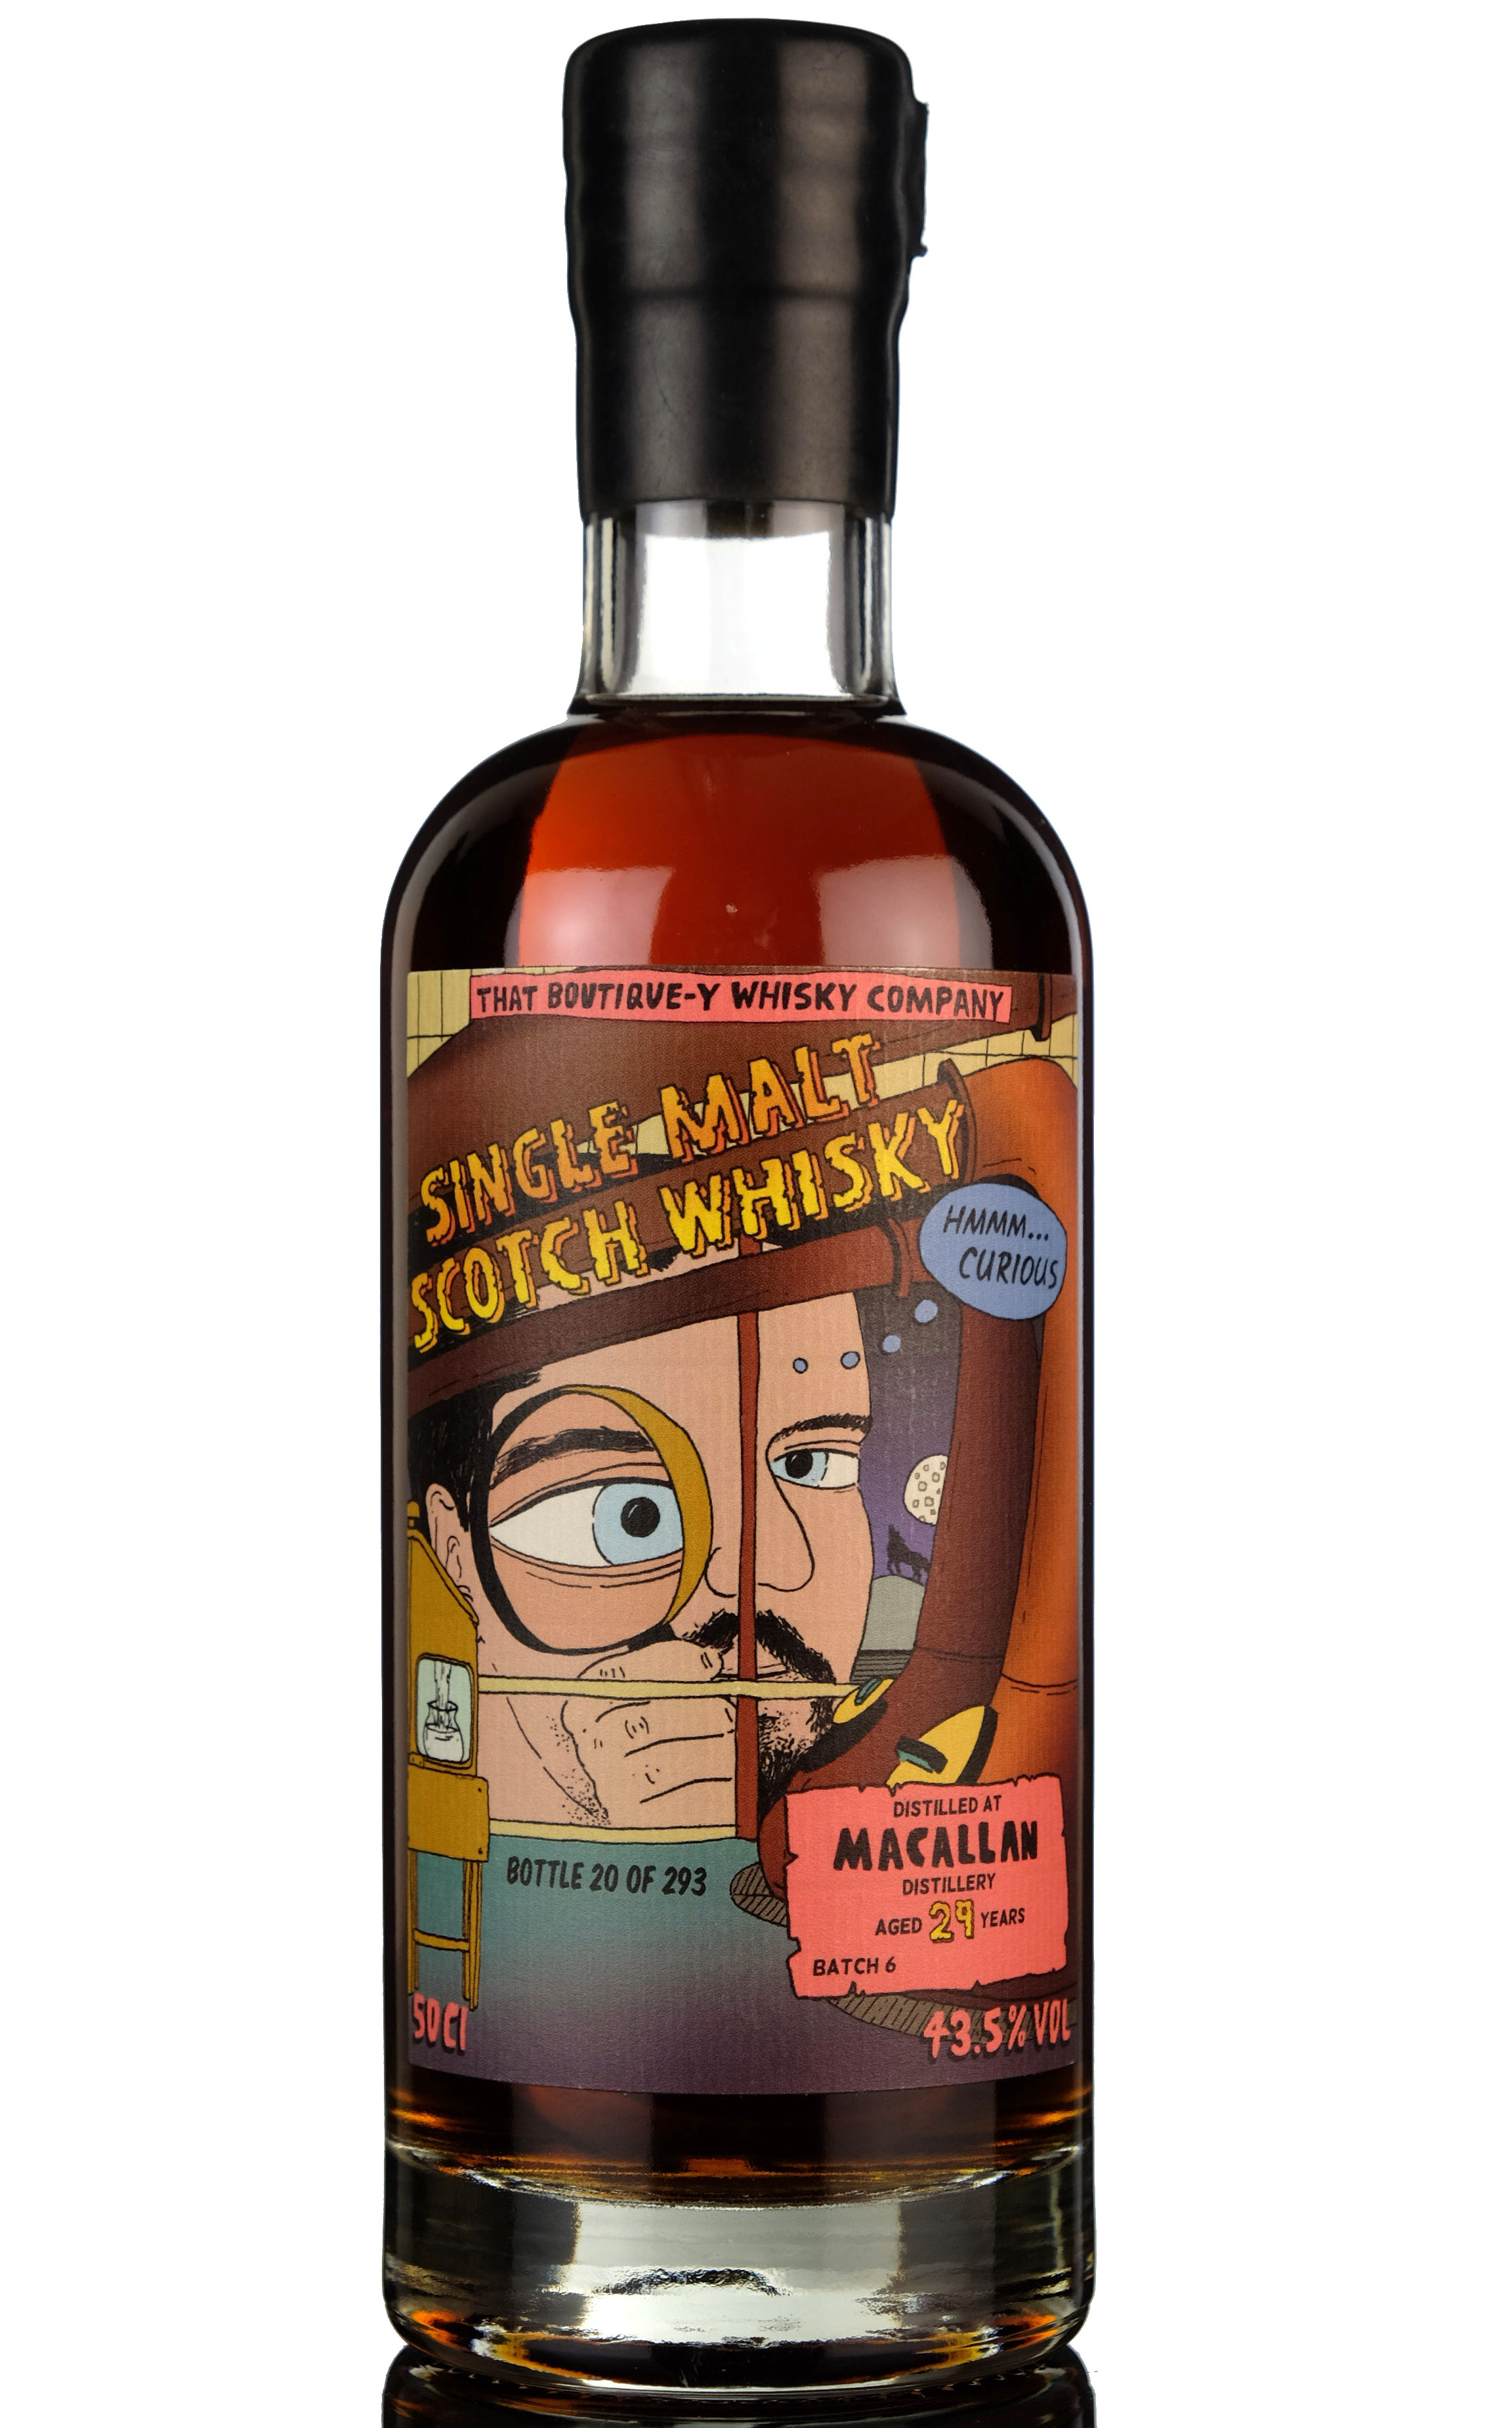 Macallan Batch 2 - That Boutique-y Whisky Company